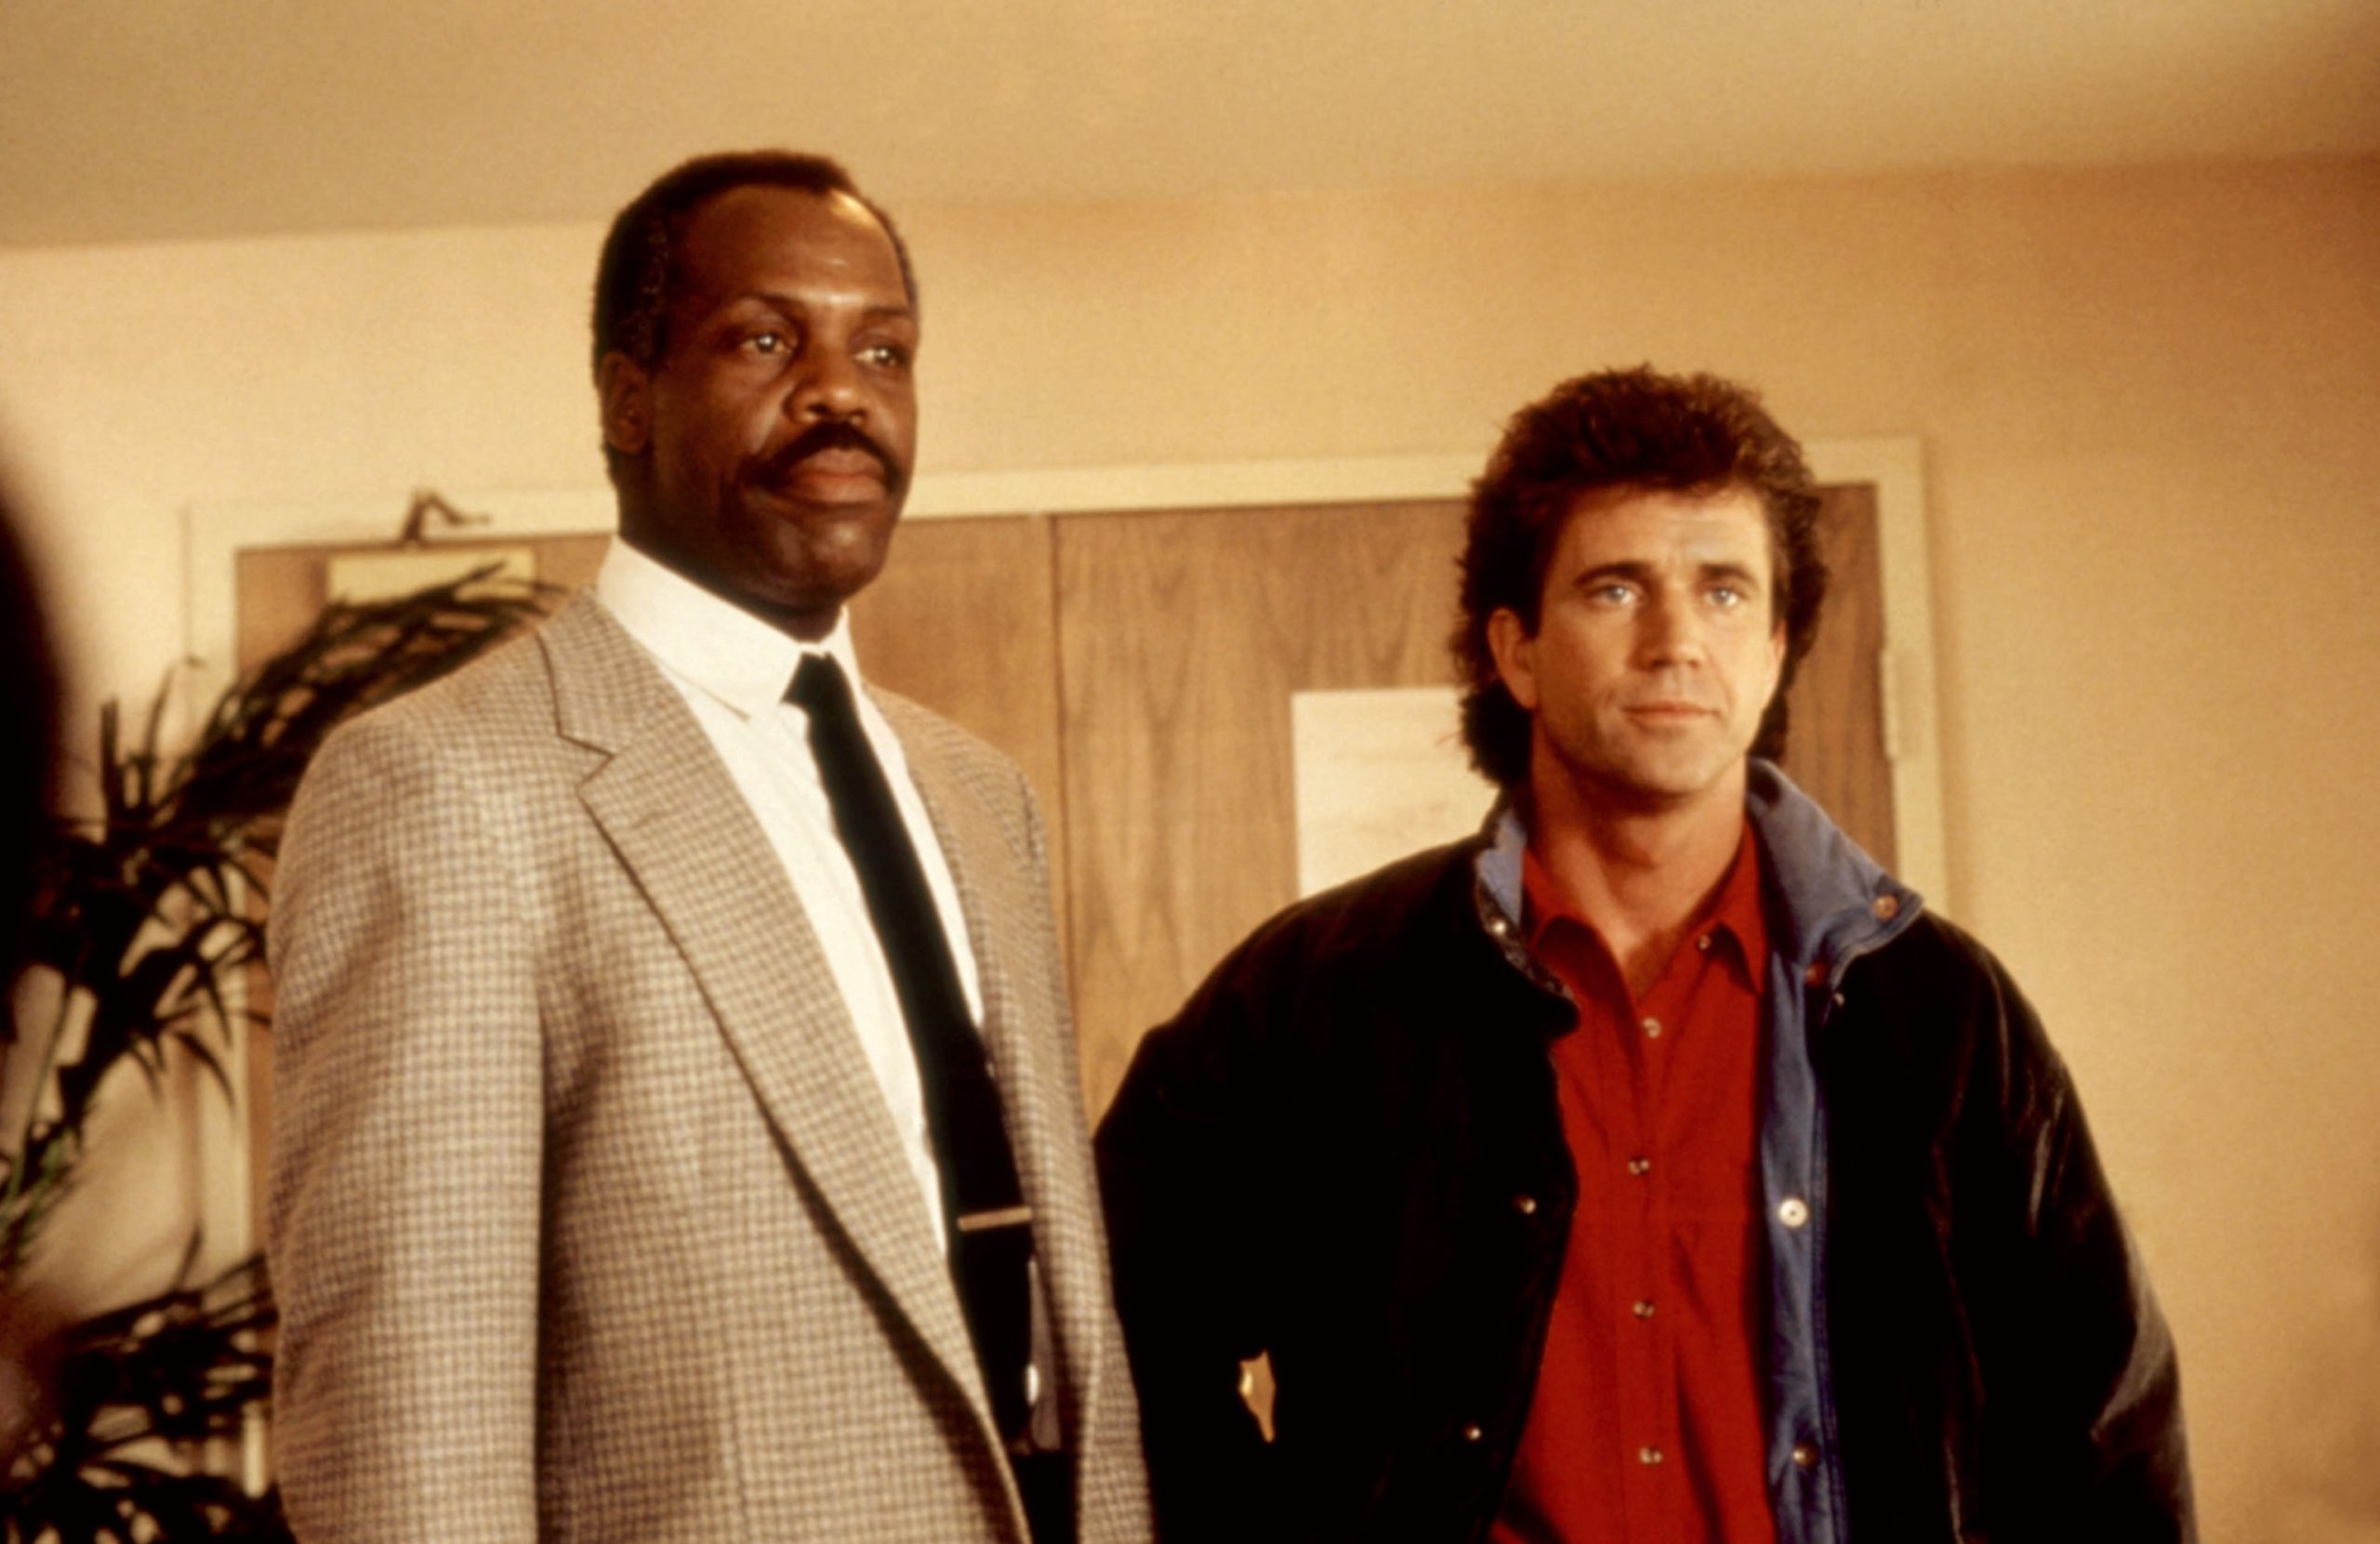 LETHAL WEAPON, Danny Glover, Mel Gibson, 1987. ©Warner Bros./courtesy Everett Collection